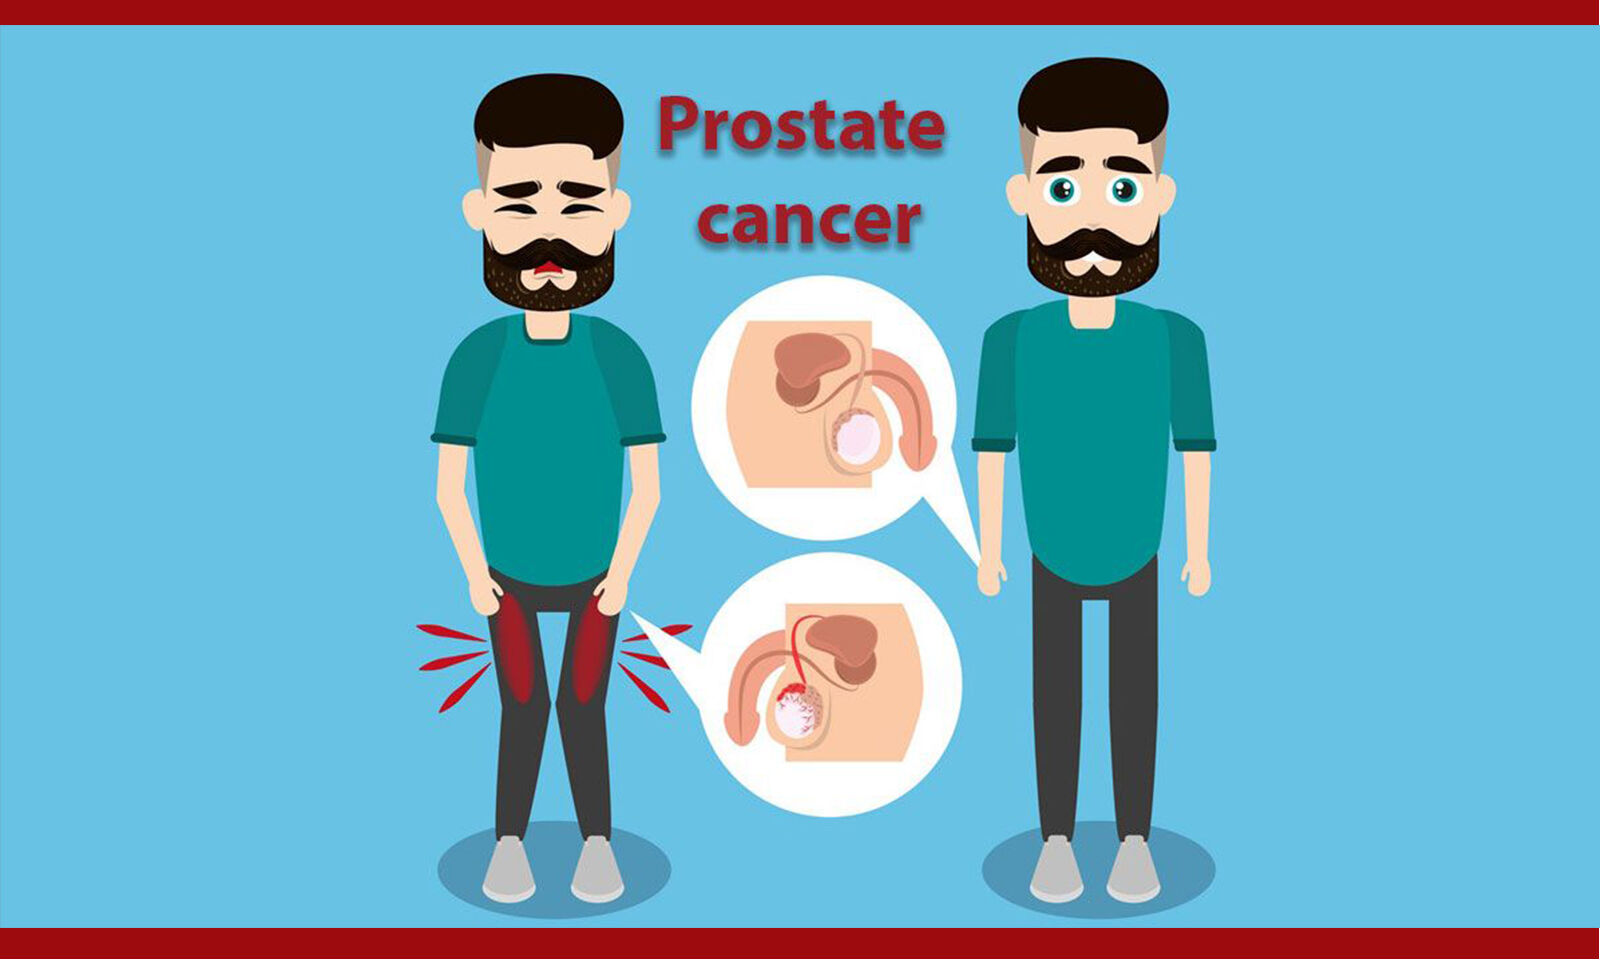 How often should you ejaculate to prevent prostate cancer